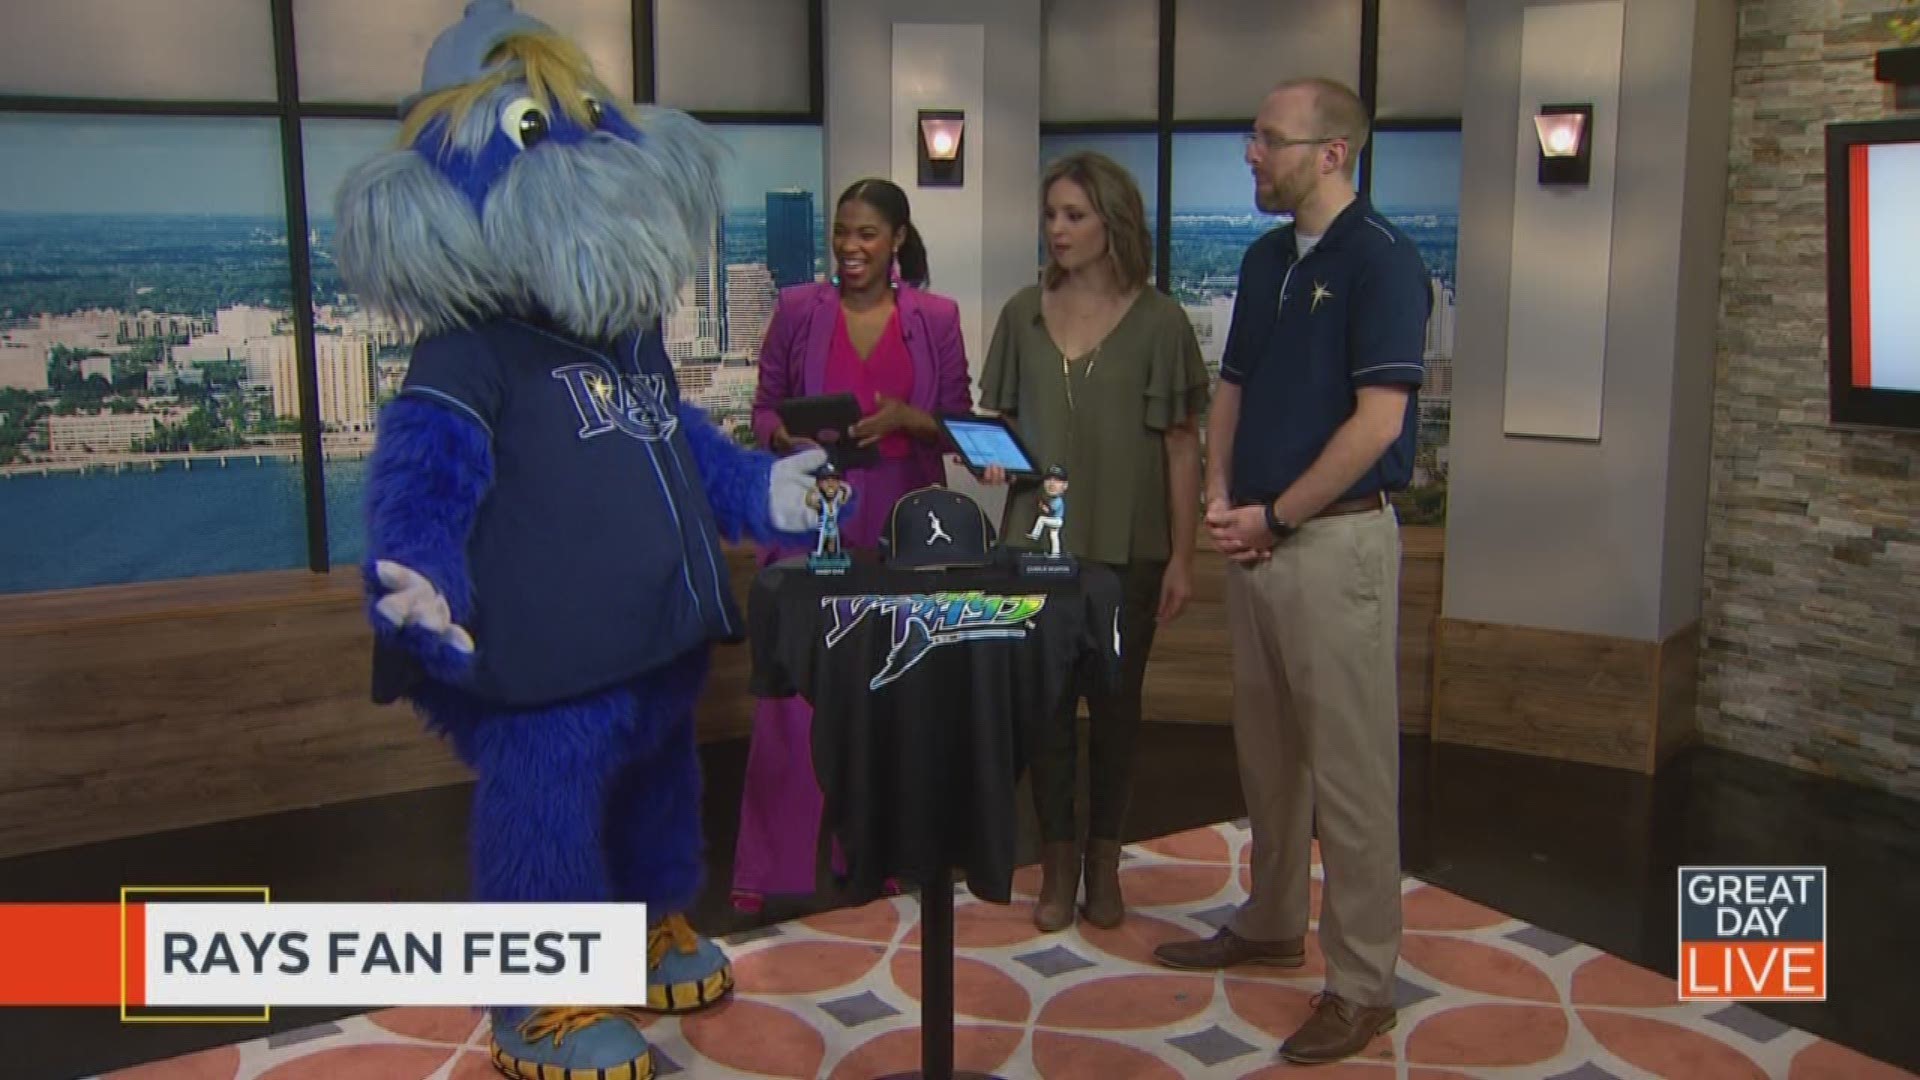 Rays Fan Fest will require (free) ticket on your mobile device